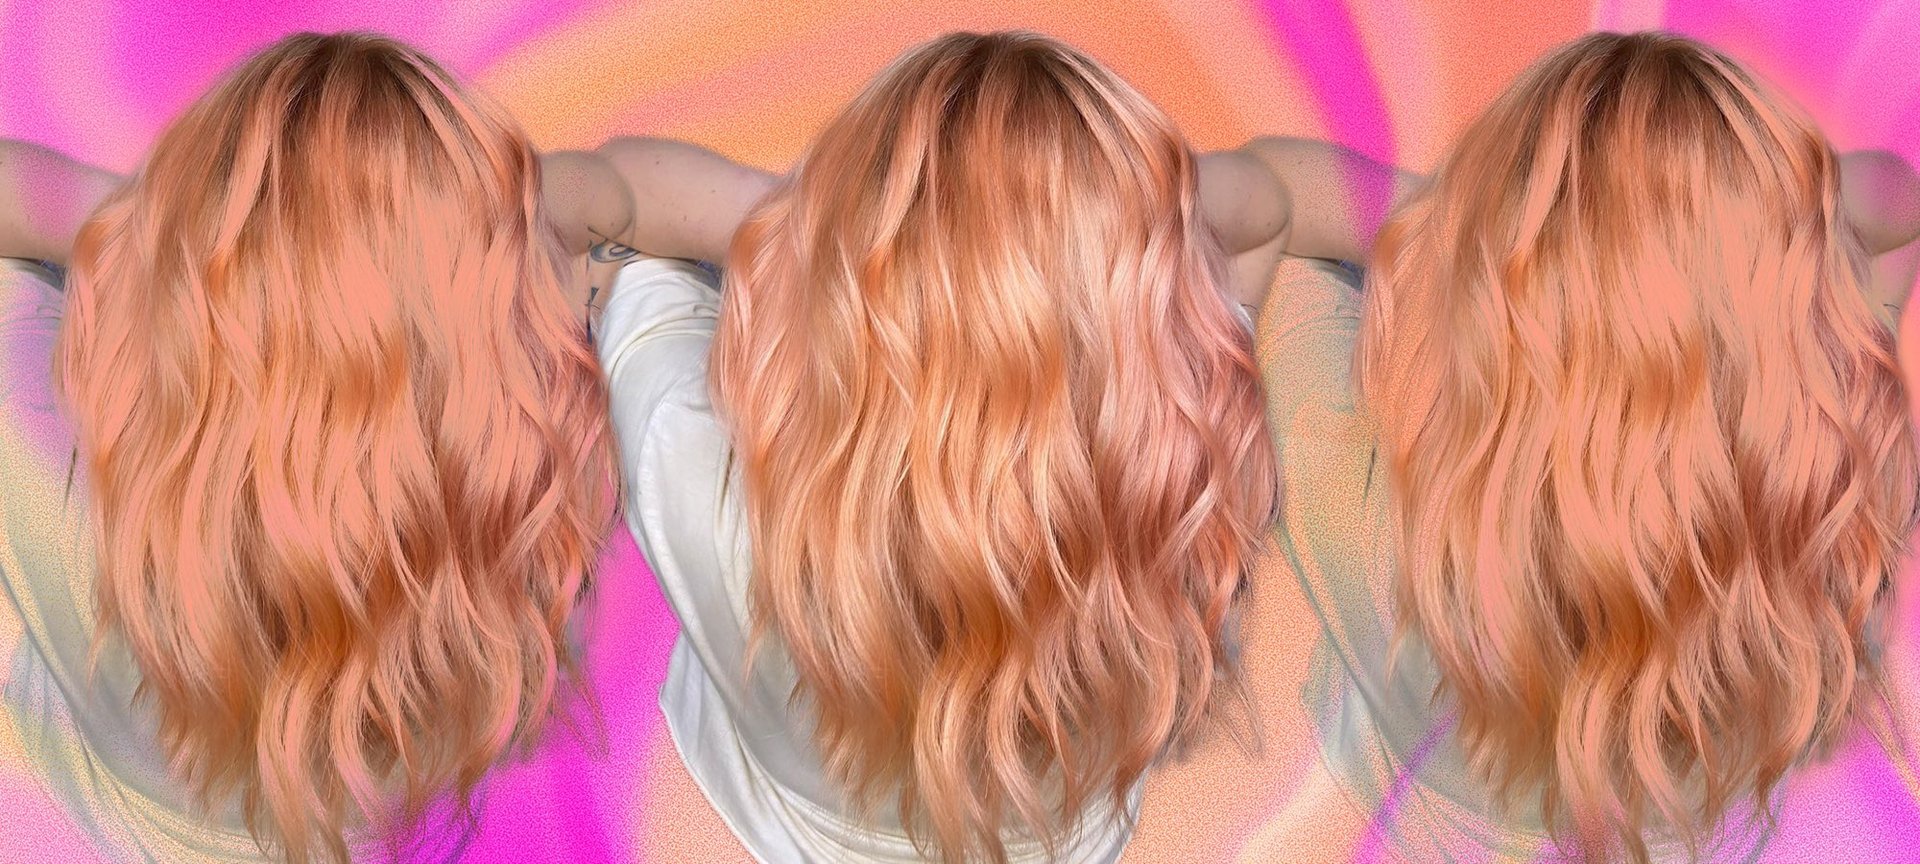 Golden Peach Hair Color Is The Unexpected Pastel Pink Sister That's  Trending This Fall | Fashionisers© | Peach hair, Peach hair colors, Hair  inspiration color